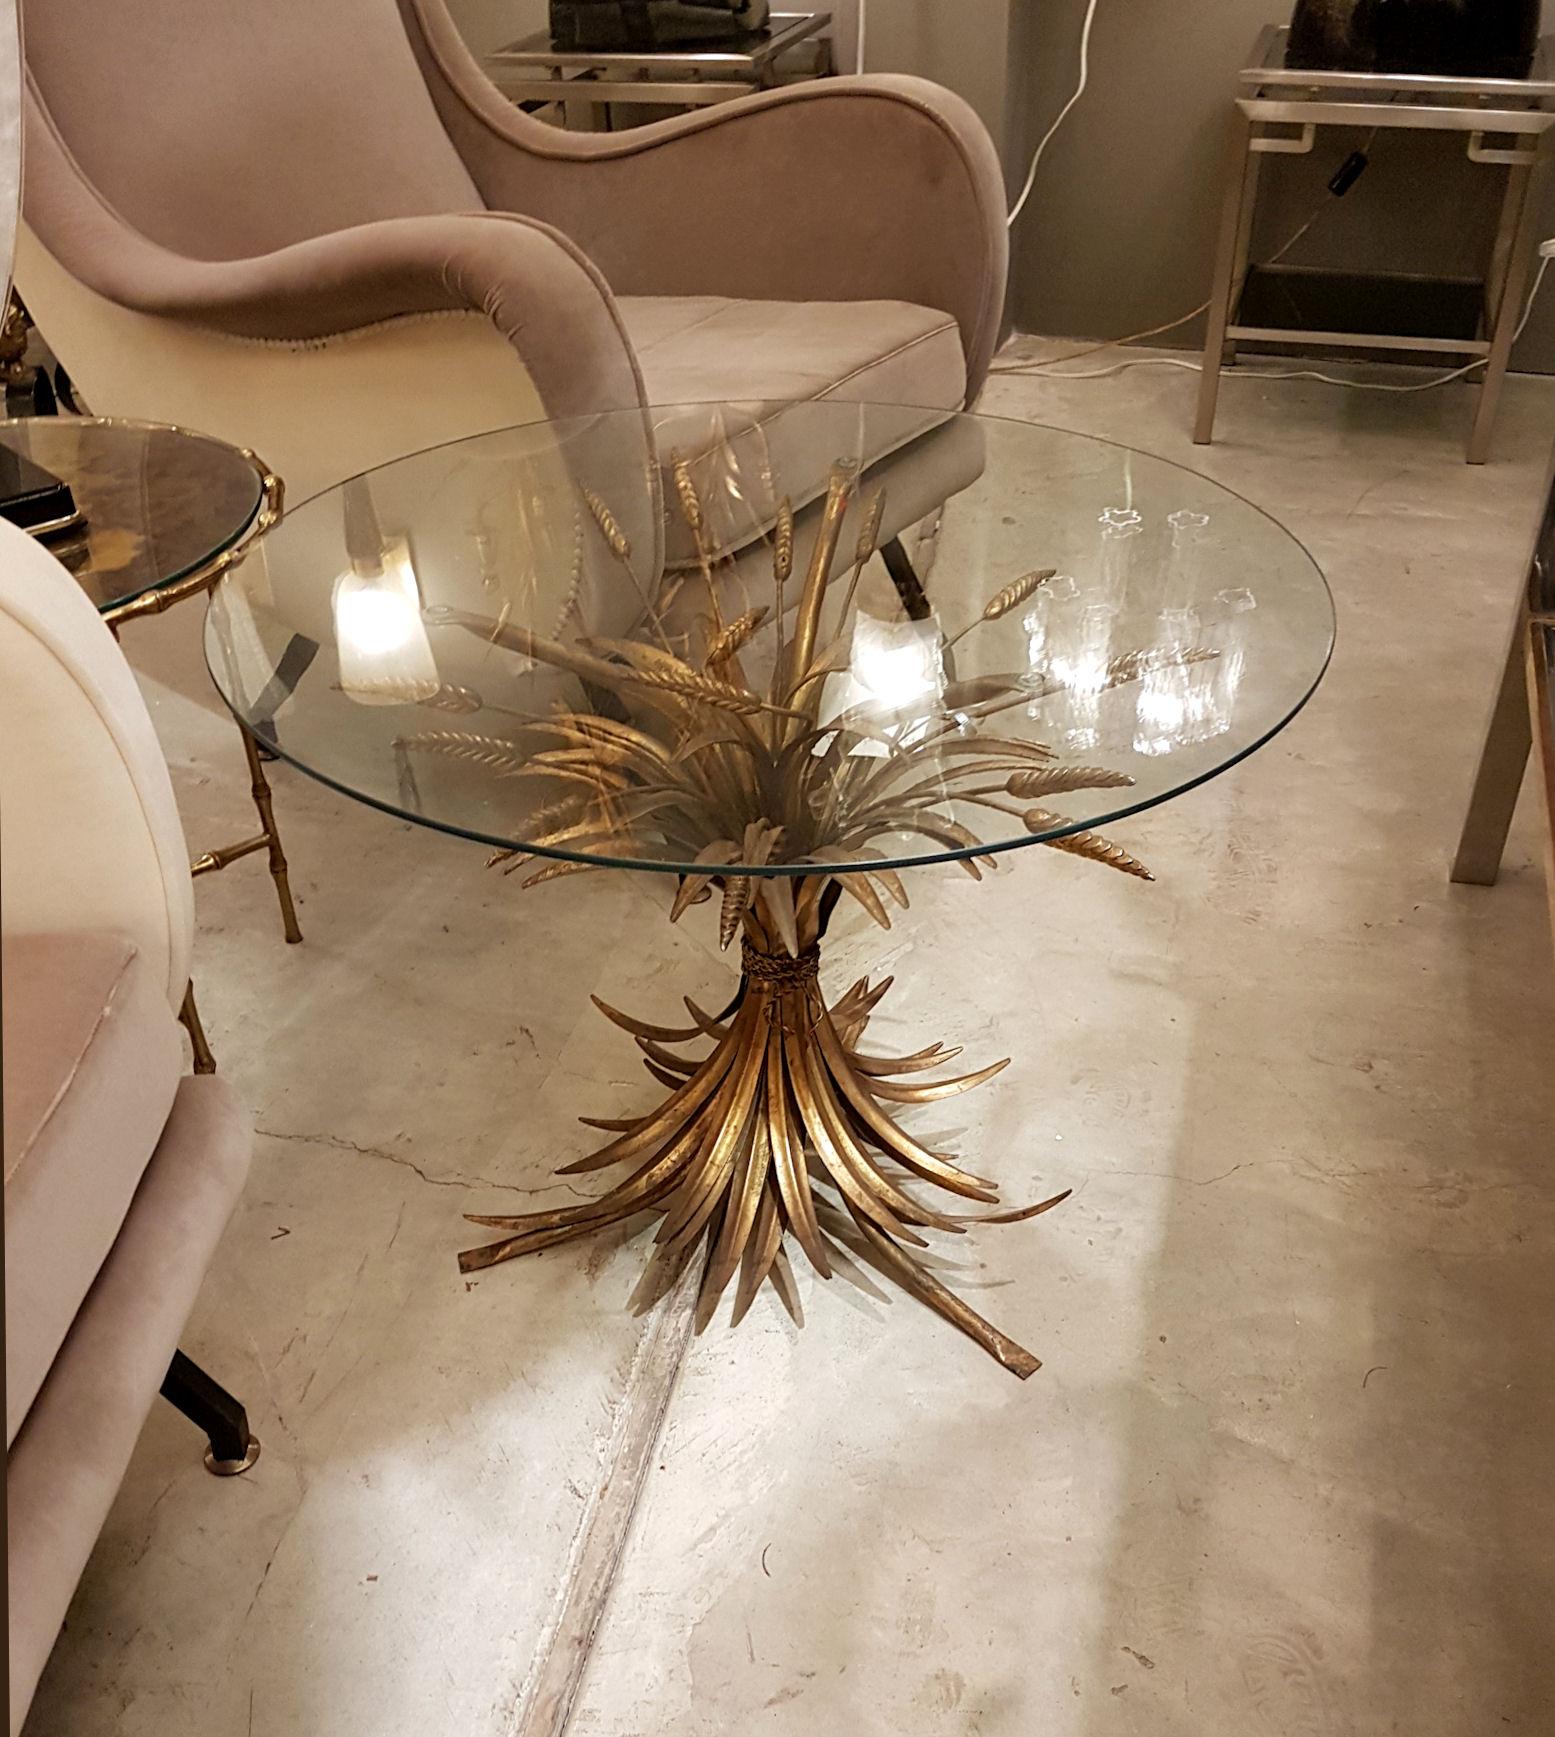 French gilt metal wheat sheaf coffee or side Mid-Century Modern table,
with top clear round glass, in perfect condition.
French Mid-Century Modern gilt metal table, Coco Chanel style.